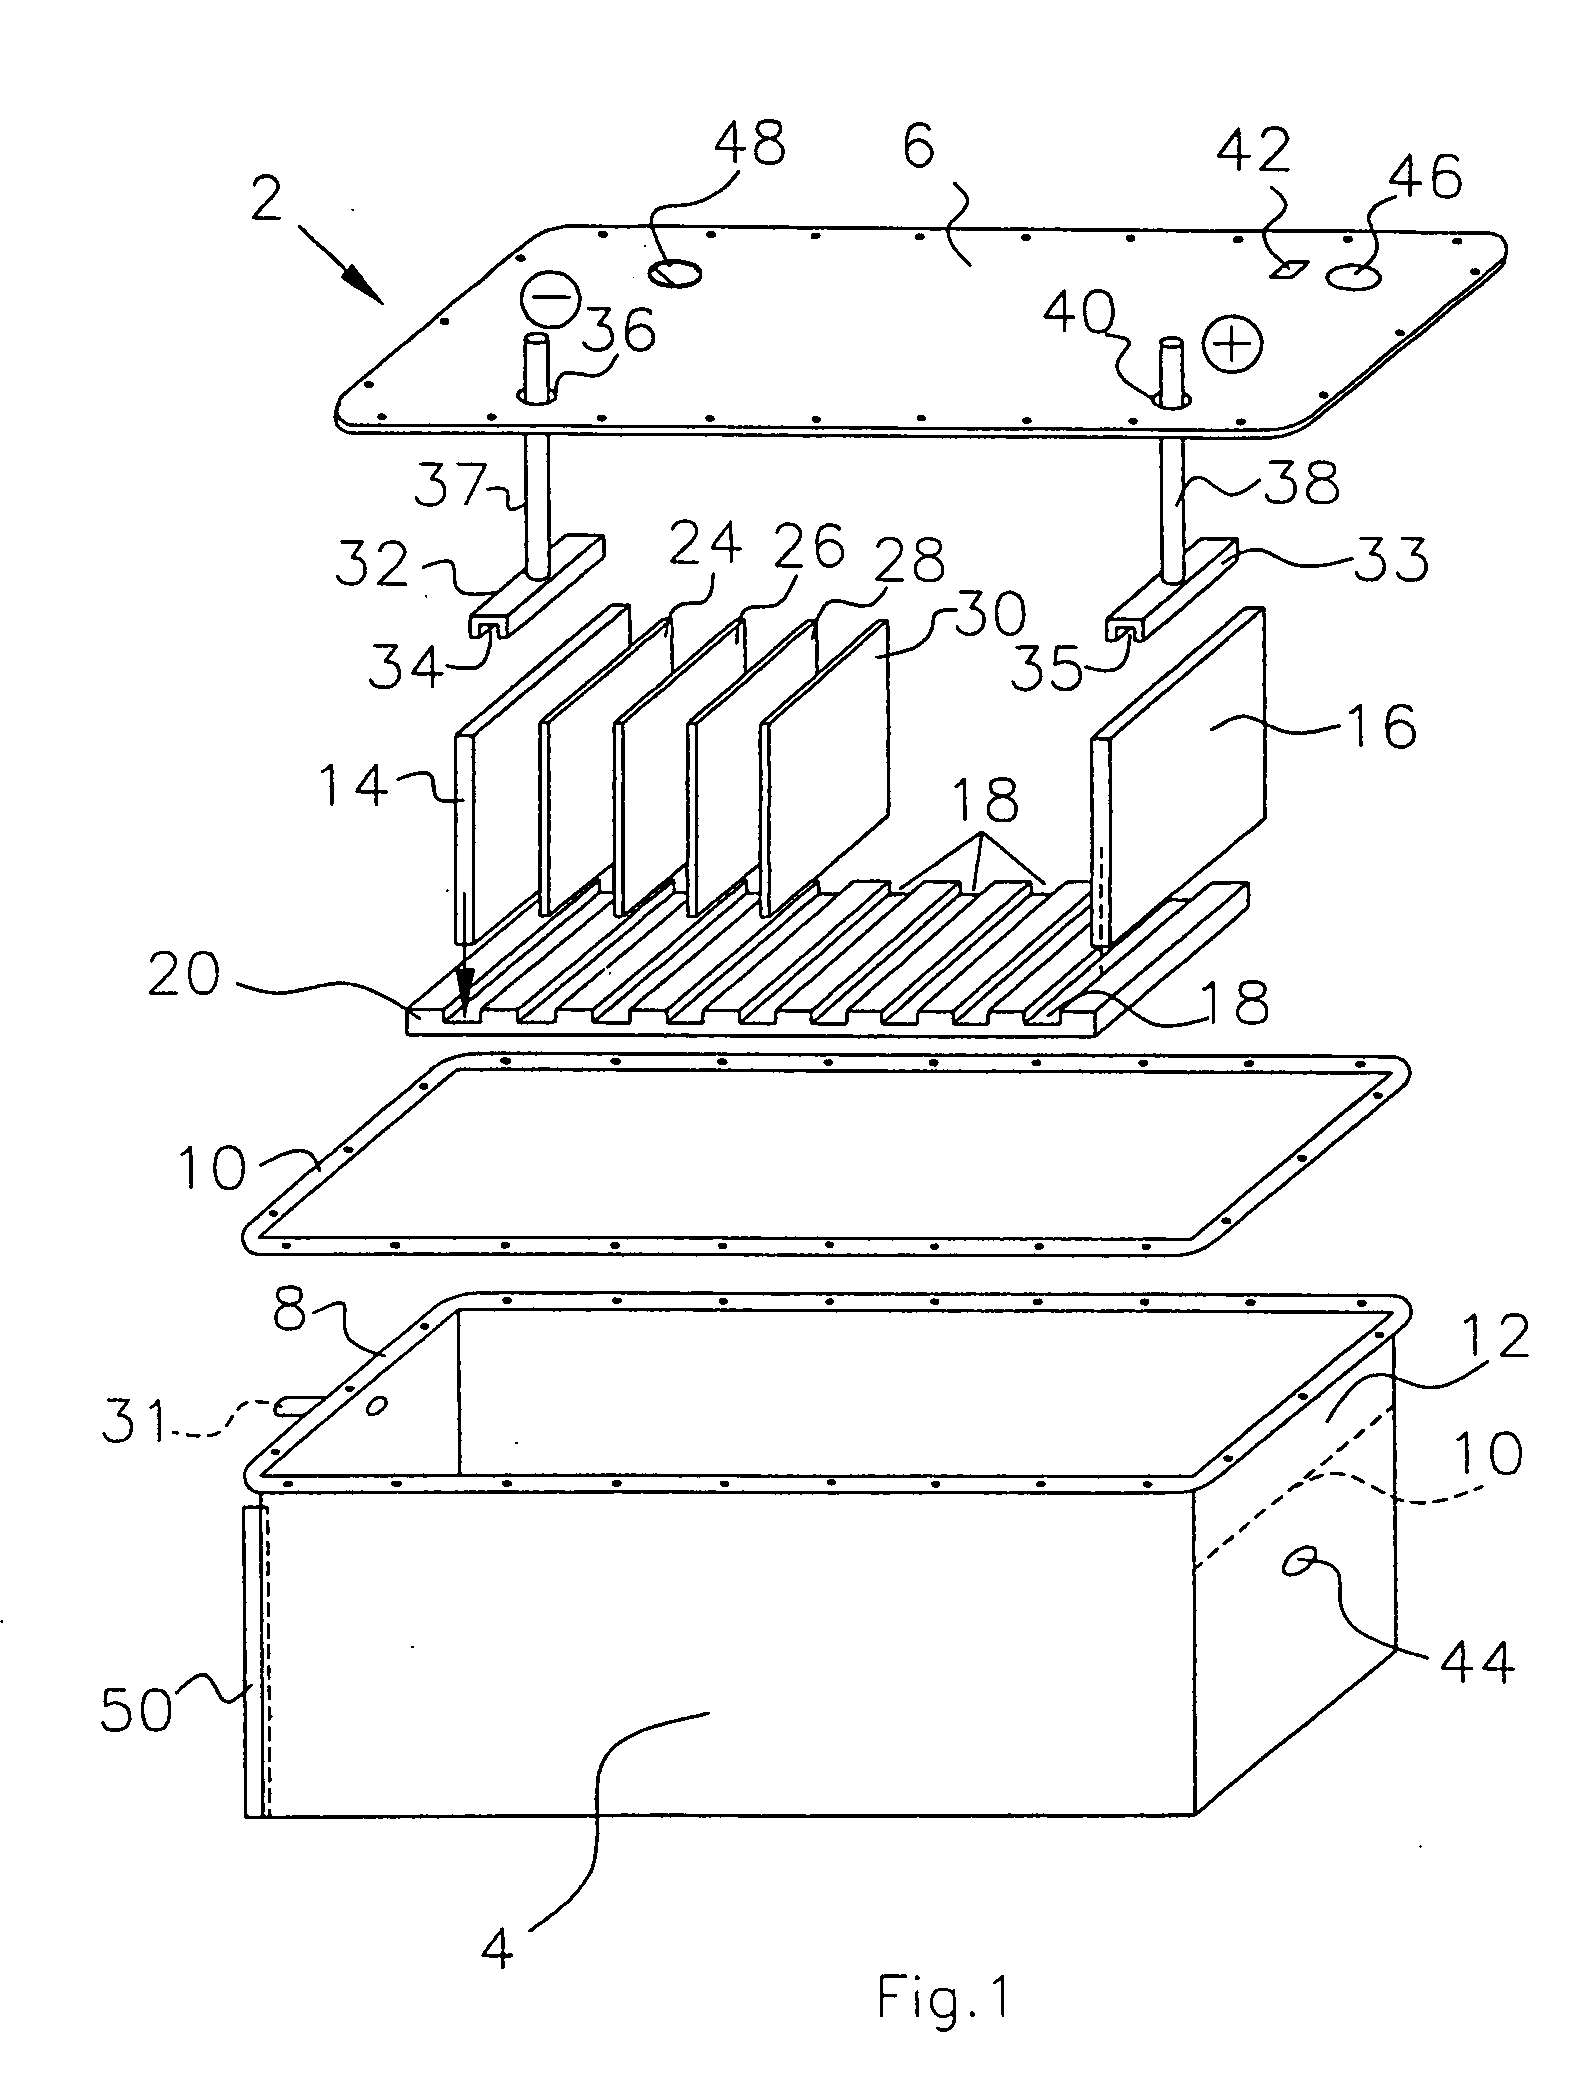 Hydrogen generator for uses in a vehicle fuel system